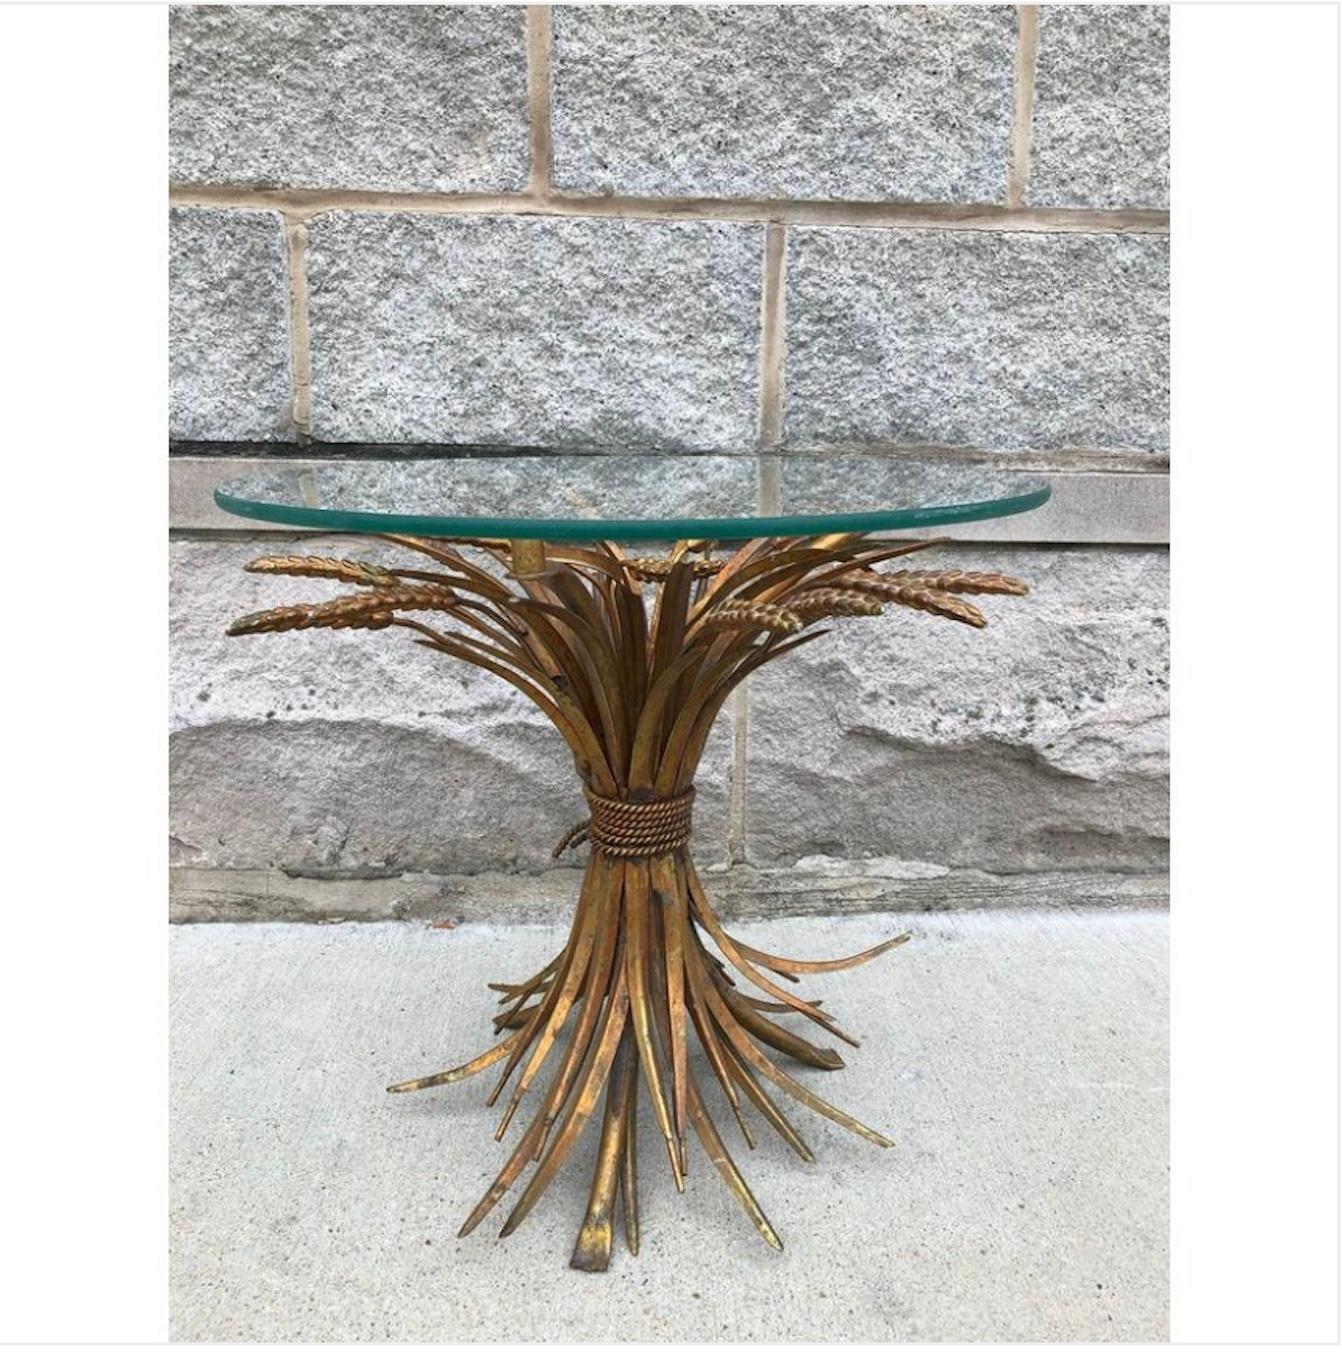 20th Century Classic Italian Wheat Sheath Table As Seen In Coco Chanels Apartment. For Sale